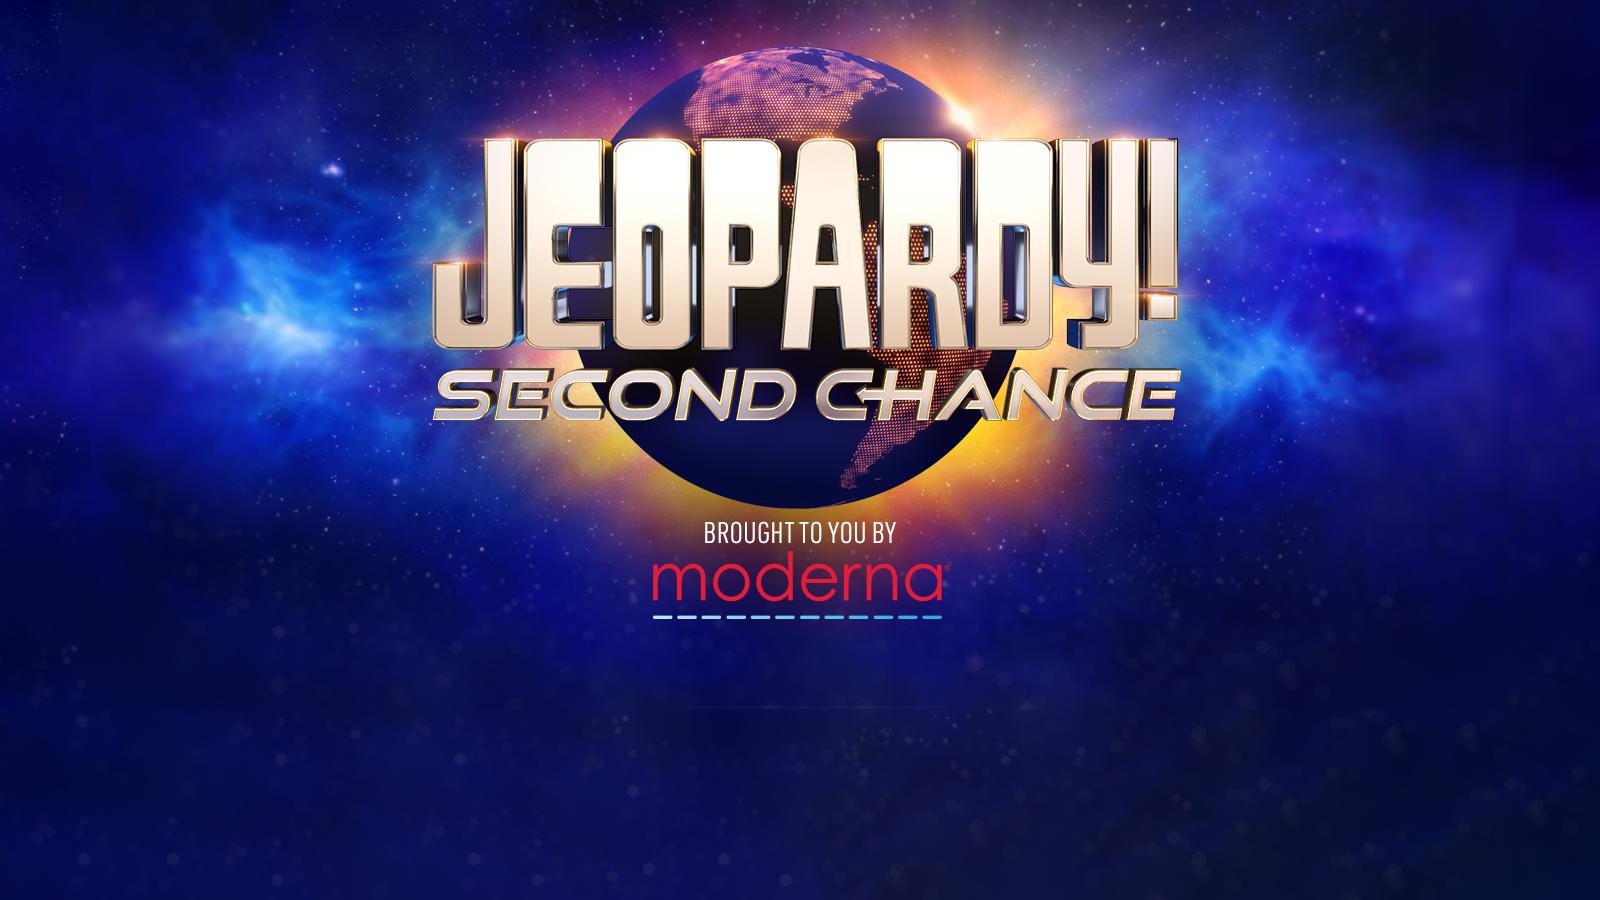 Jeopardy! Second Chance brought to you by Moderna